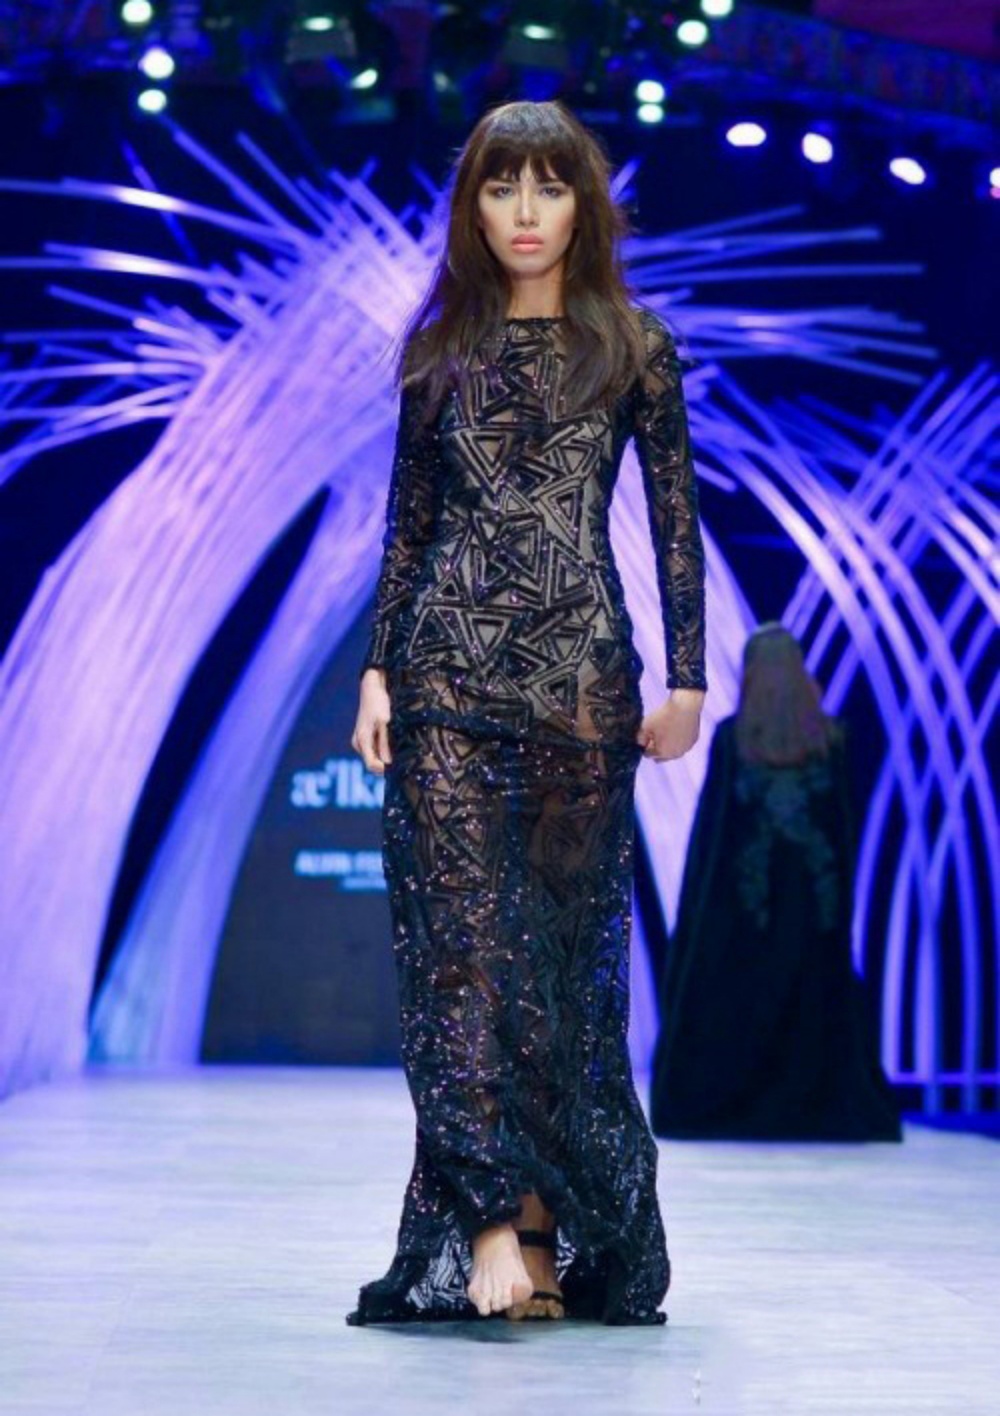 Goosebumps on how to handle the catwalk incident of veteran long legs, Vu Thu Phuong covered it up in a split second - 6